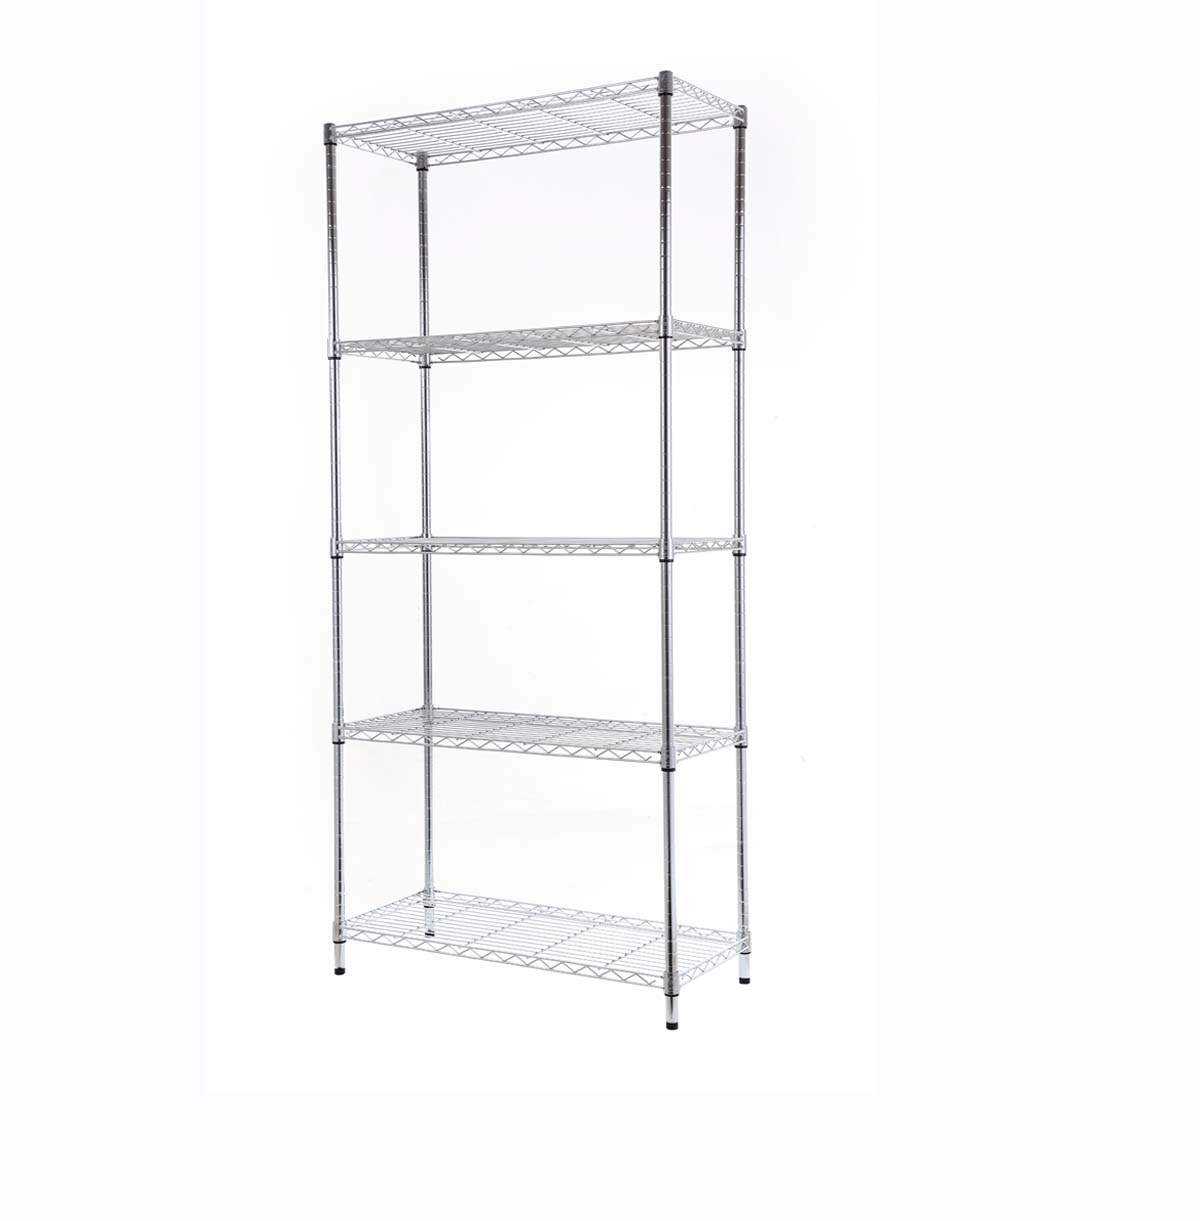 wire kitchen/pantry shelving unit.Which direction should the warehousing and shelving industry devel